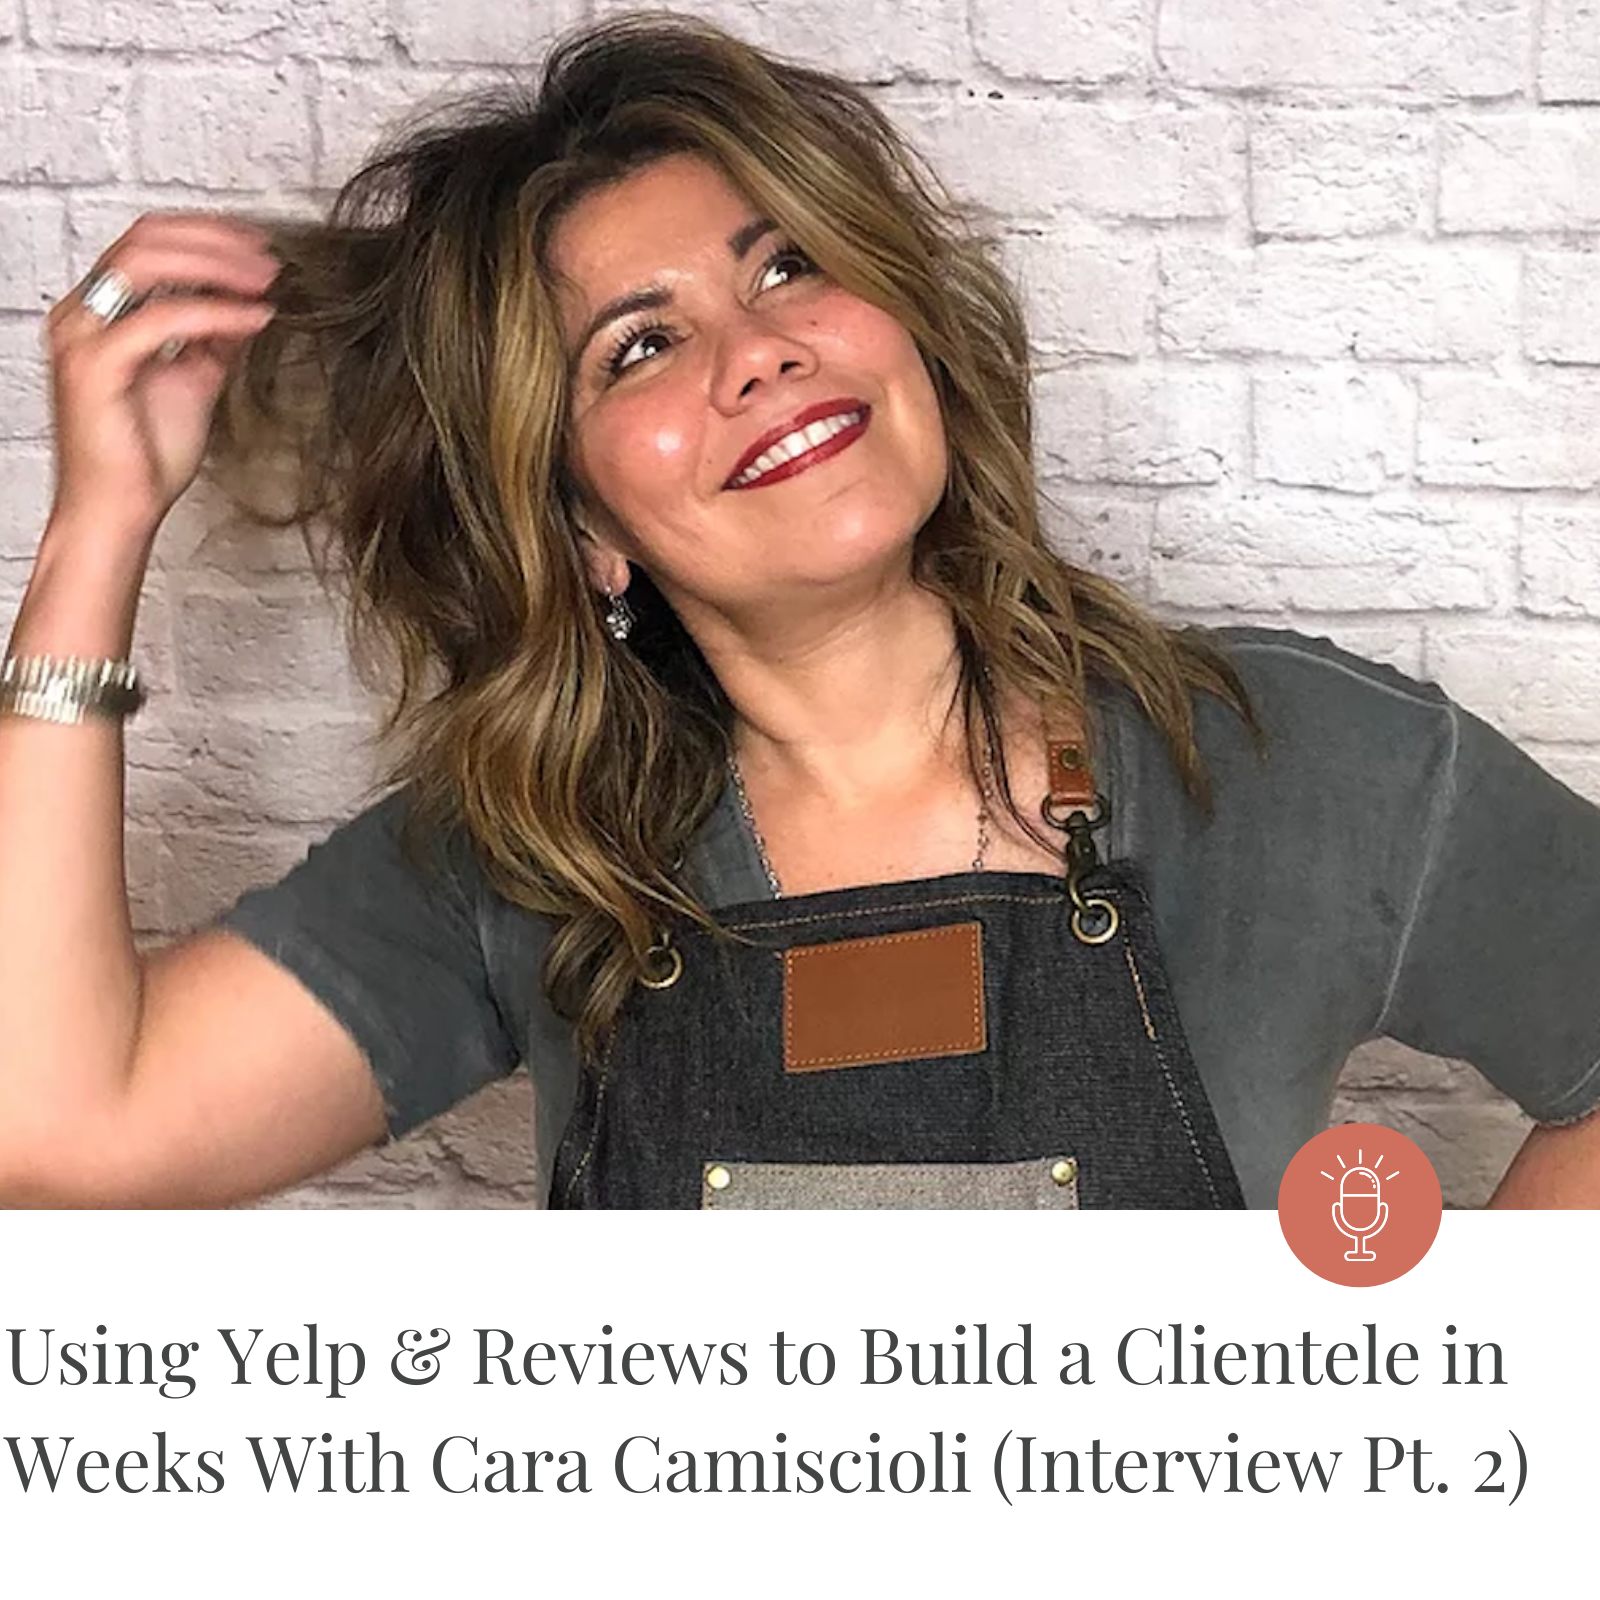 Episode #174: Using Yelp &amp; reviews to build a clientele in weeks with Cara Camiscioli (Interview Pt. 2)